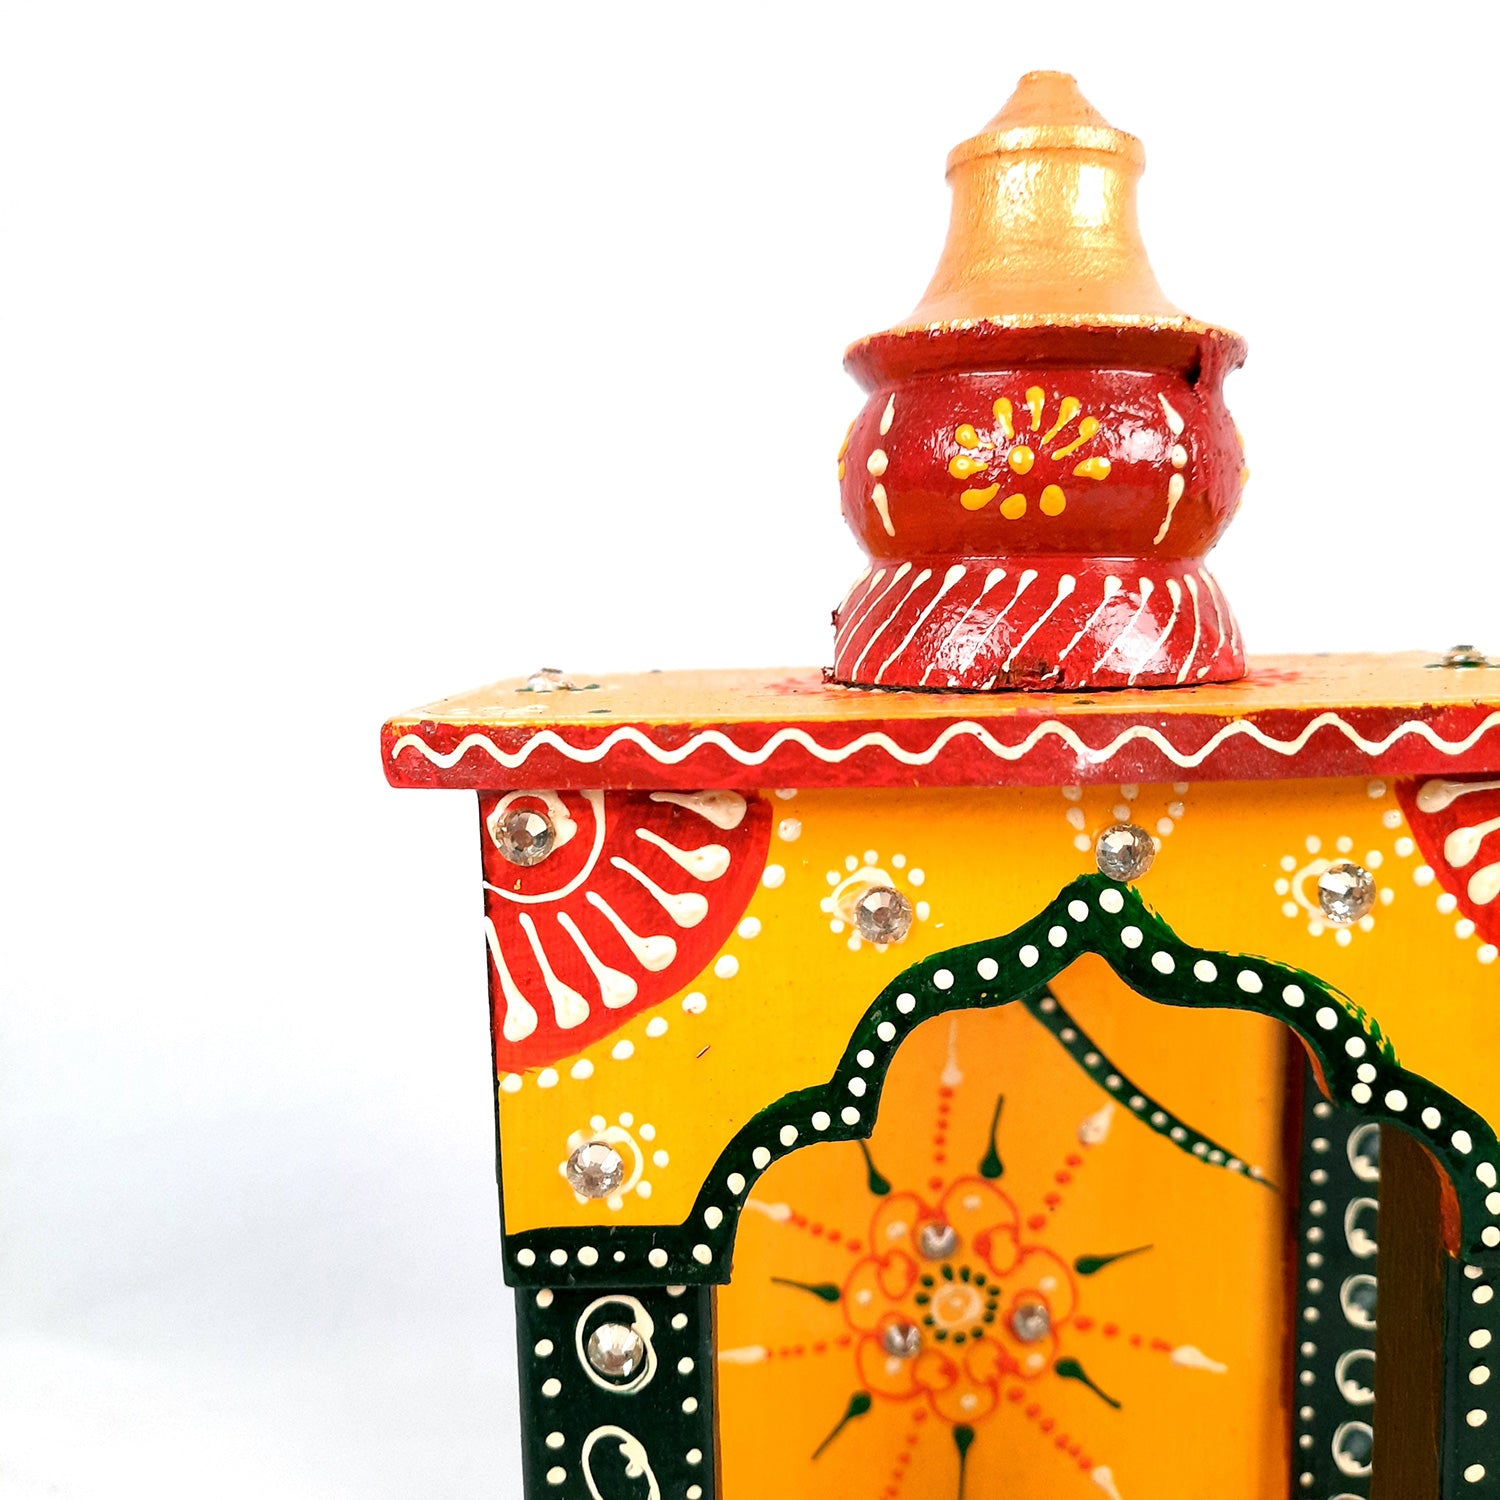 Pooja Temple Wooden | Mandir For Home | Puja Stand | Pooja Unit Small Wall Mounted – For Ghar, Office, Shop -10 Inch - Apkamart